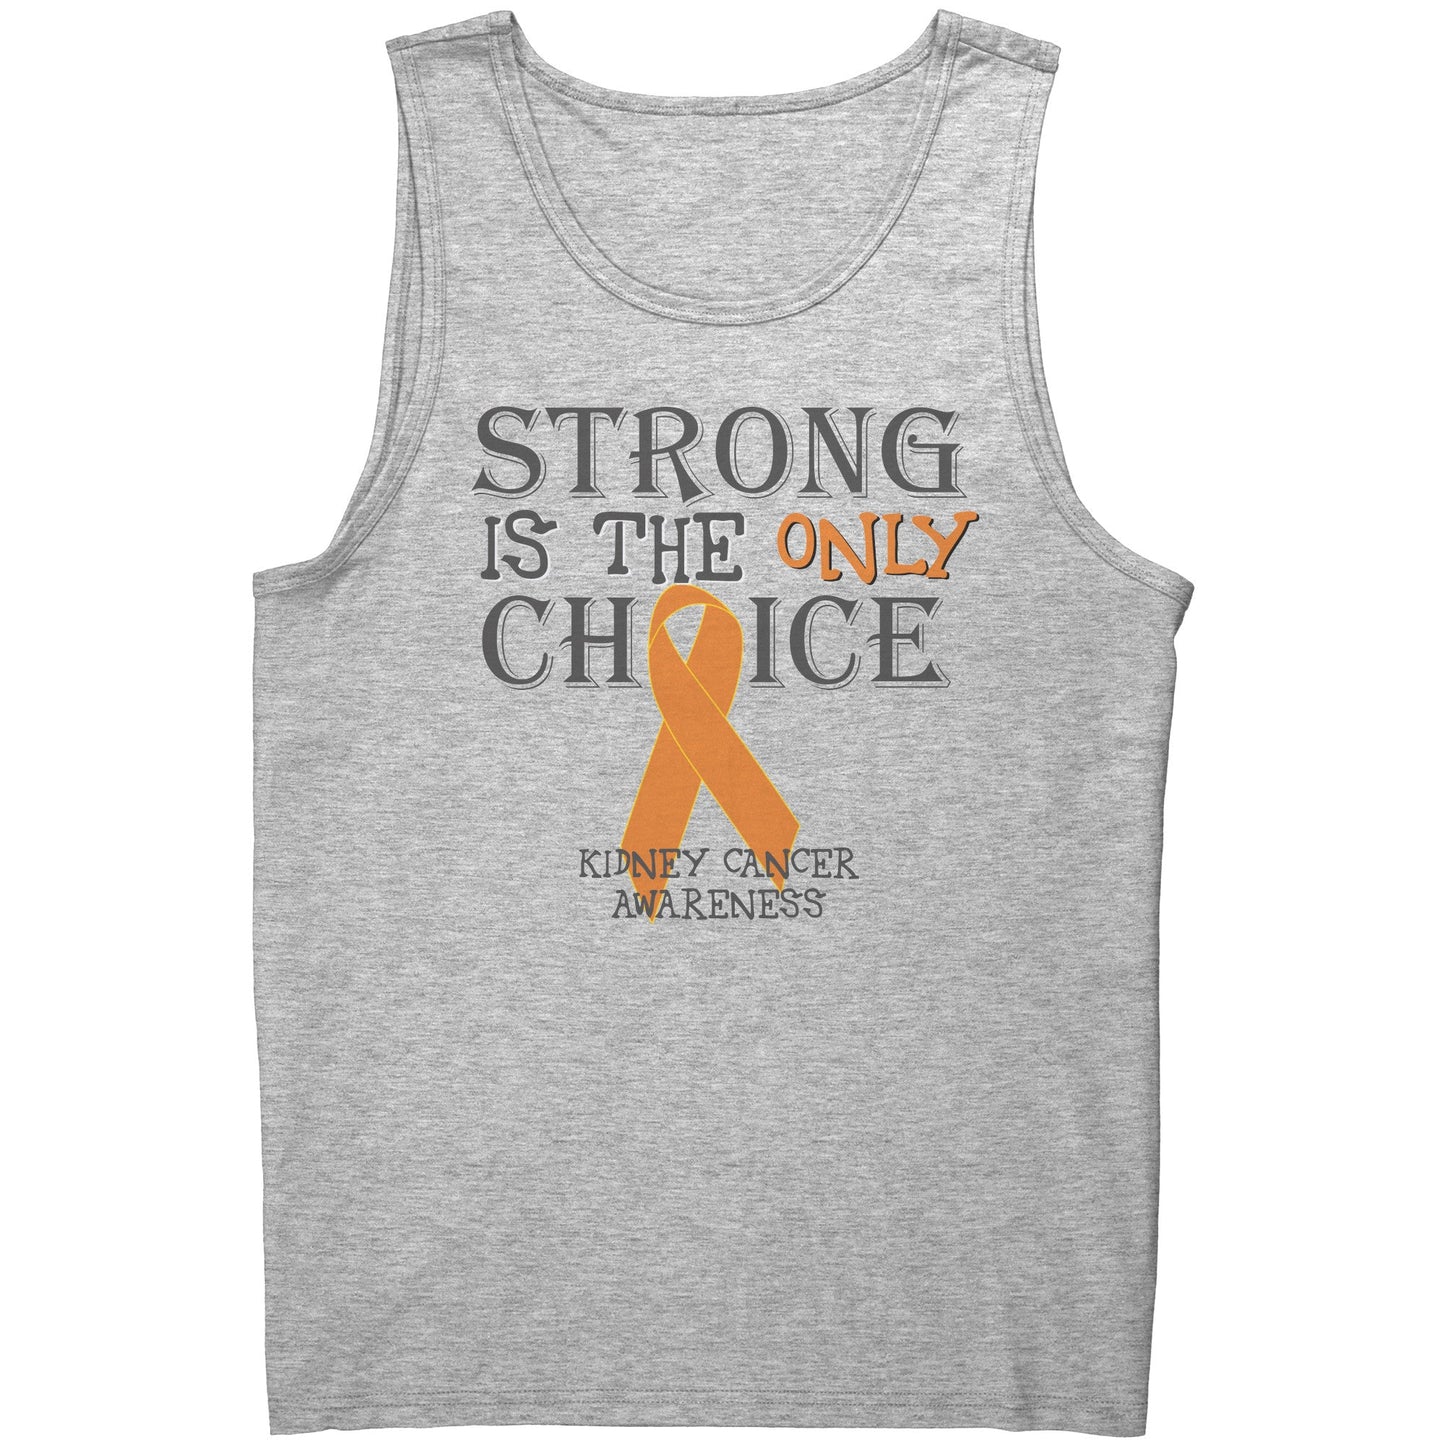 Strong is the Only Choice -Kidney Cancer Awareness T-Shirt, Hoodie, Tank |x|